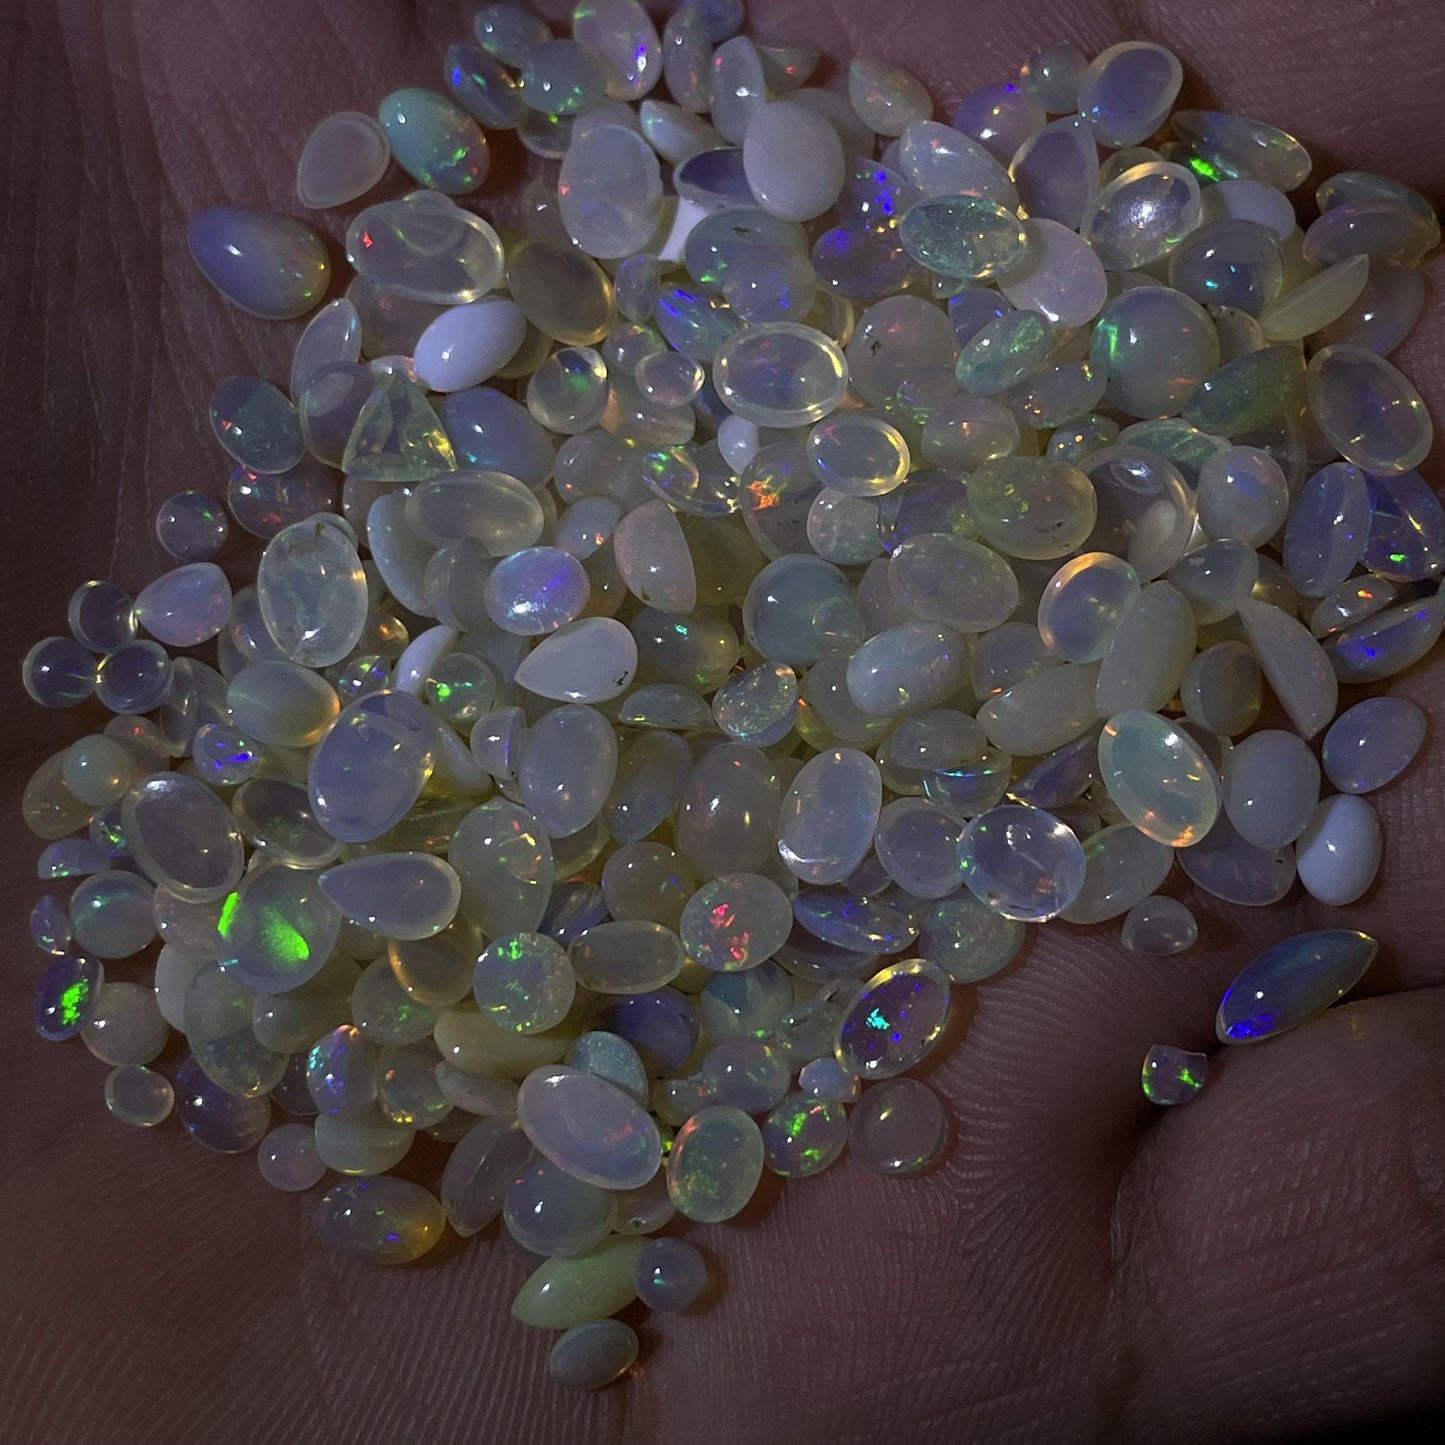 Natural Ethiopian Opal Cabochon - Average Size of 0.3 cts